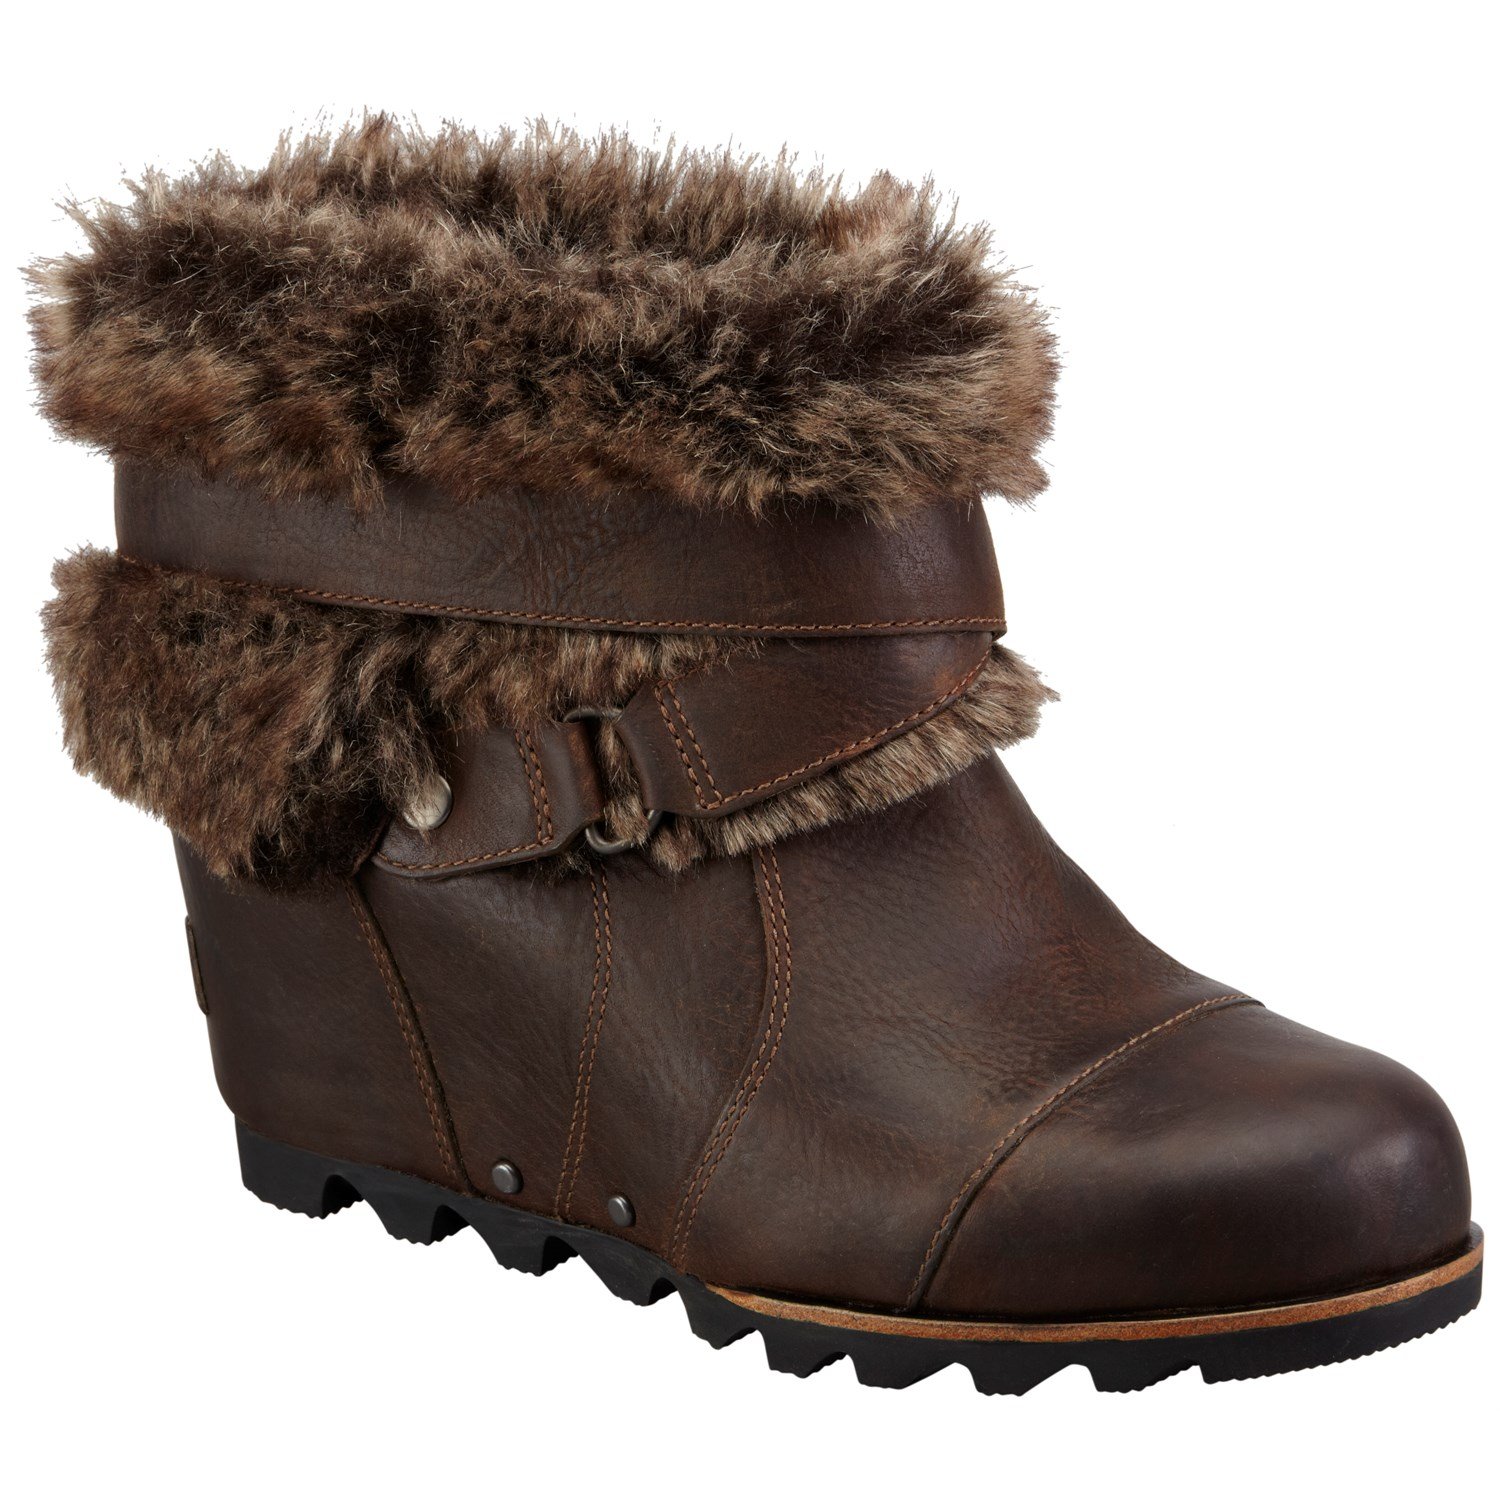 Sorel Joan of Arctic Wedge Ankle Boots - Women's | evo outlet